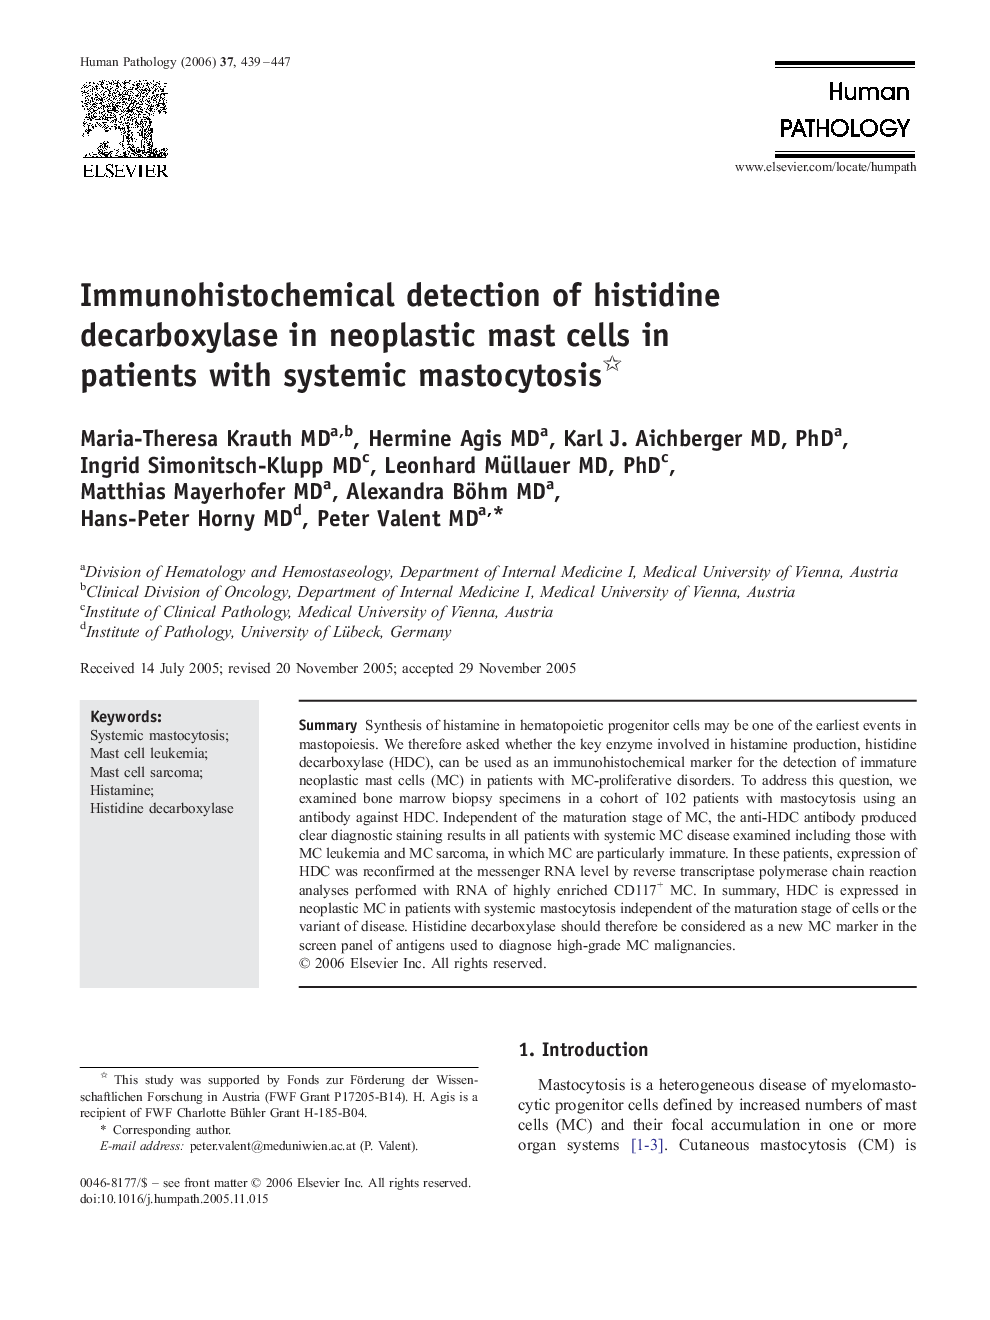 Immunohistochemical detection of histidine decarboxylase in neoplastic mast cells in patients with systemic mastocytosis 